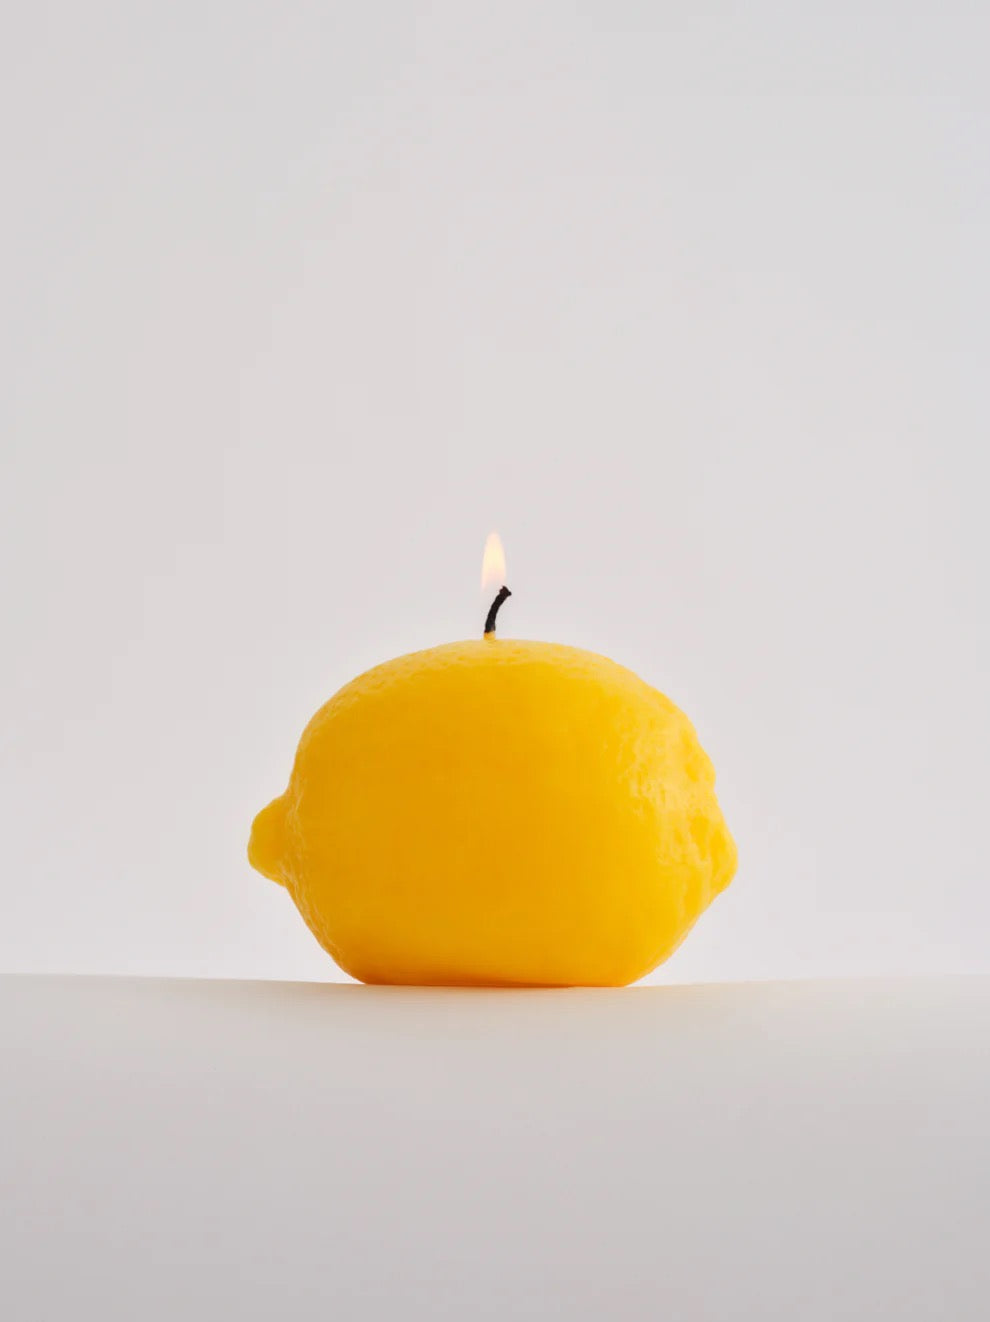 A Nonna's Grocer Lemon Candle made of a soy wax blend.